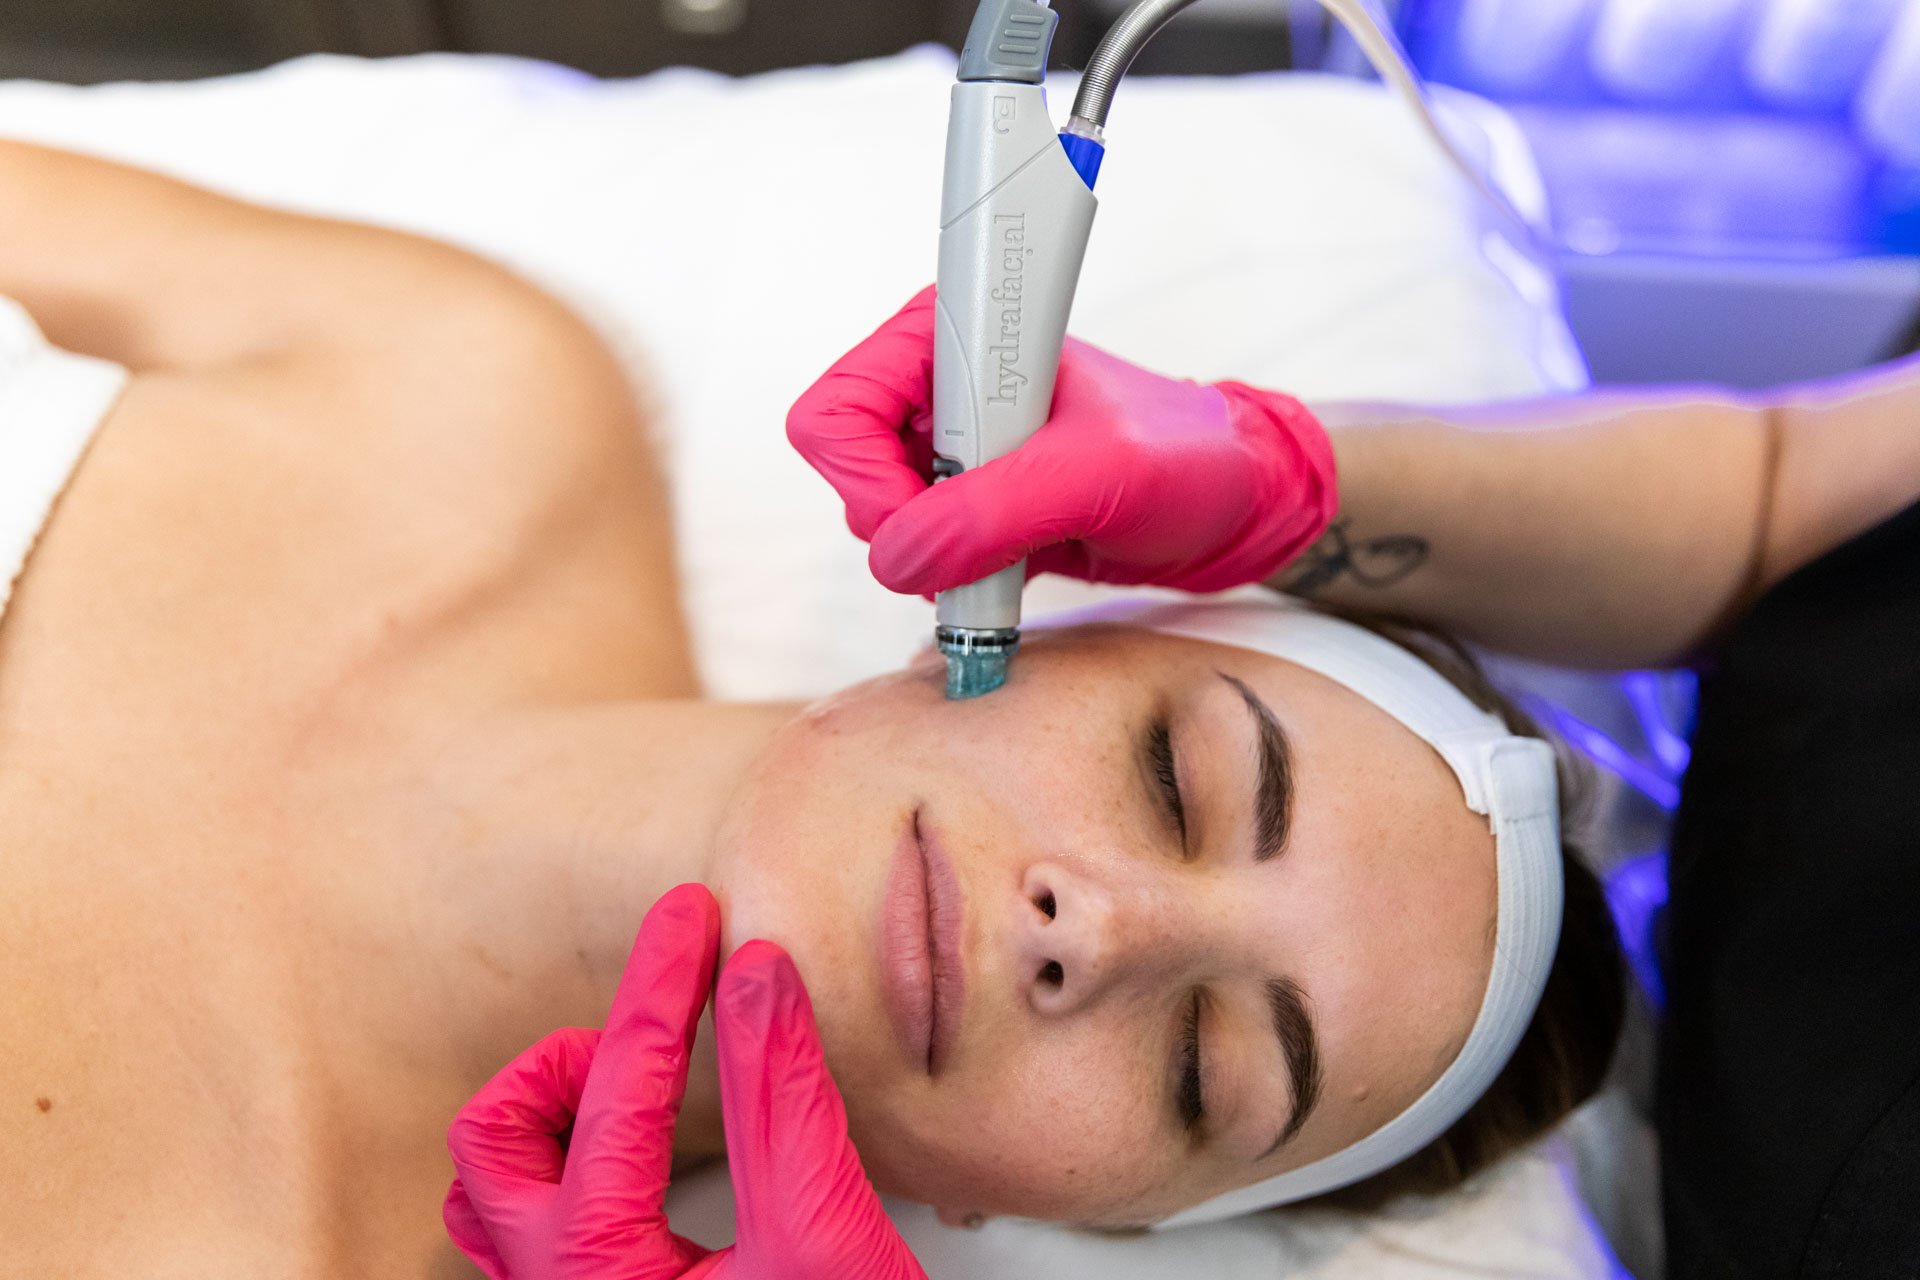 Renew Provider Performing a HydraFacial on a Patient